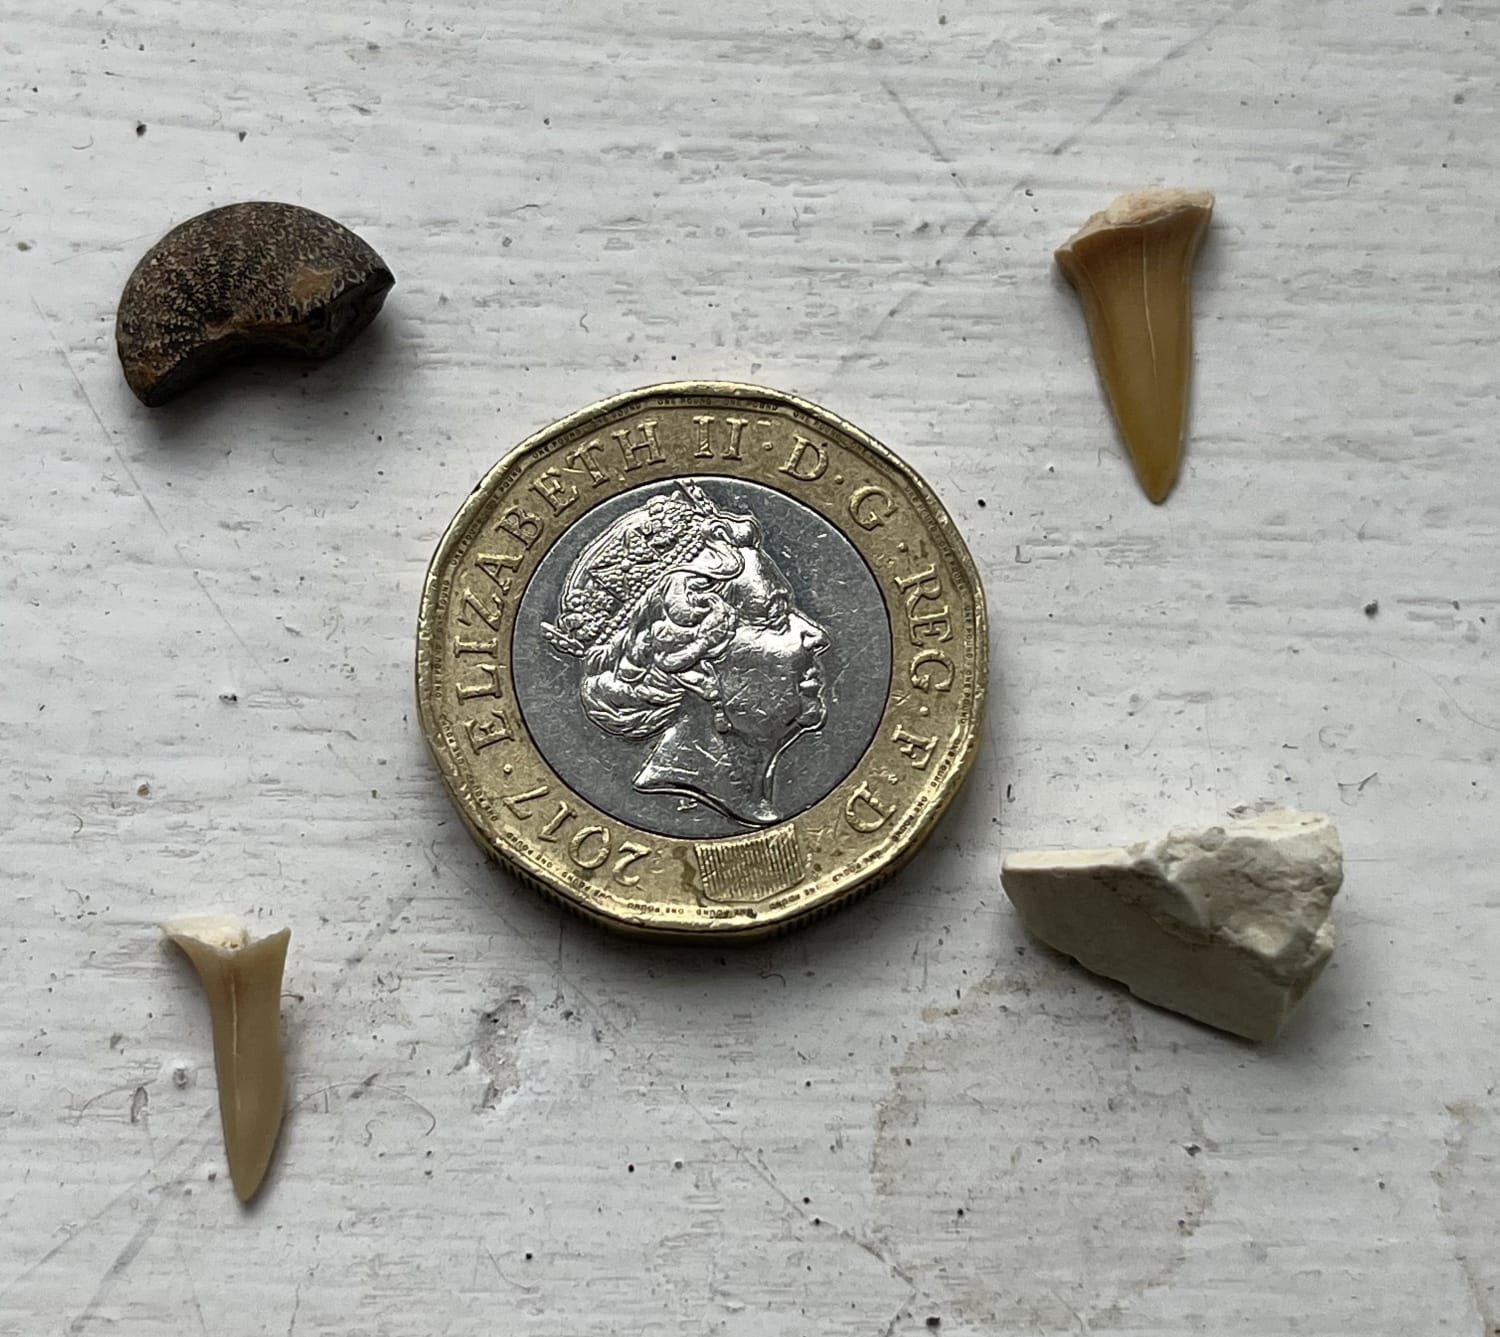 Guys, what does each of these four fossils belong to? I bought them from a aquarium near Lake District, UK. According to the aquarium some of them are ancient shark teeth. But they told me they are all over 50 million years old. Does any fossil expert know what exact species these are all from?